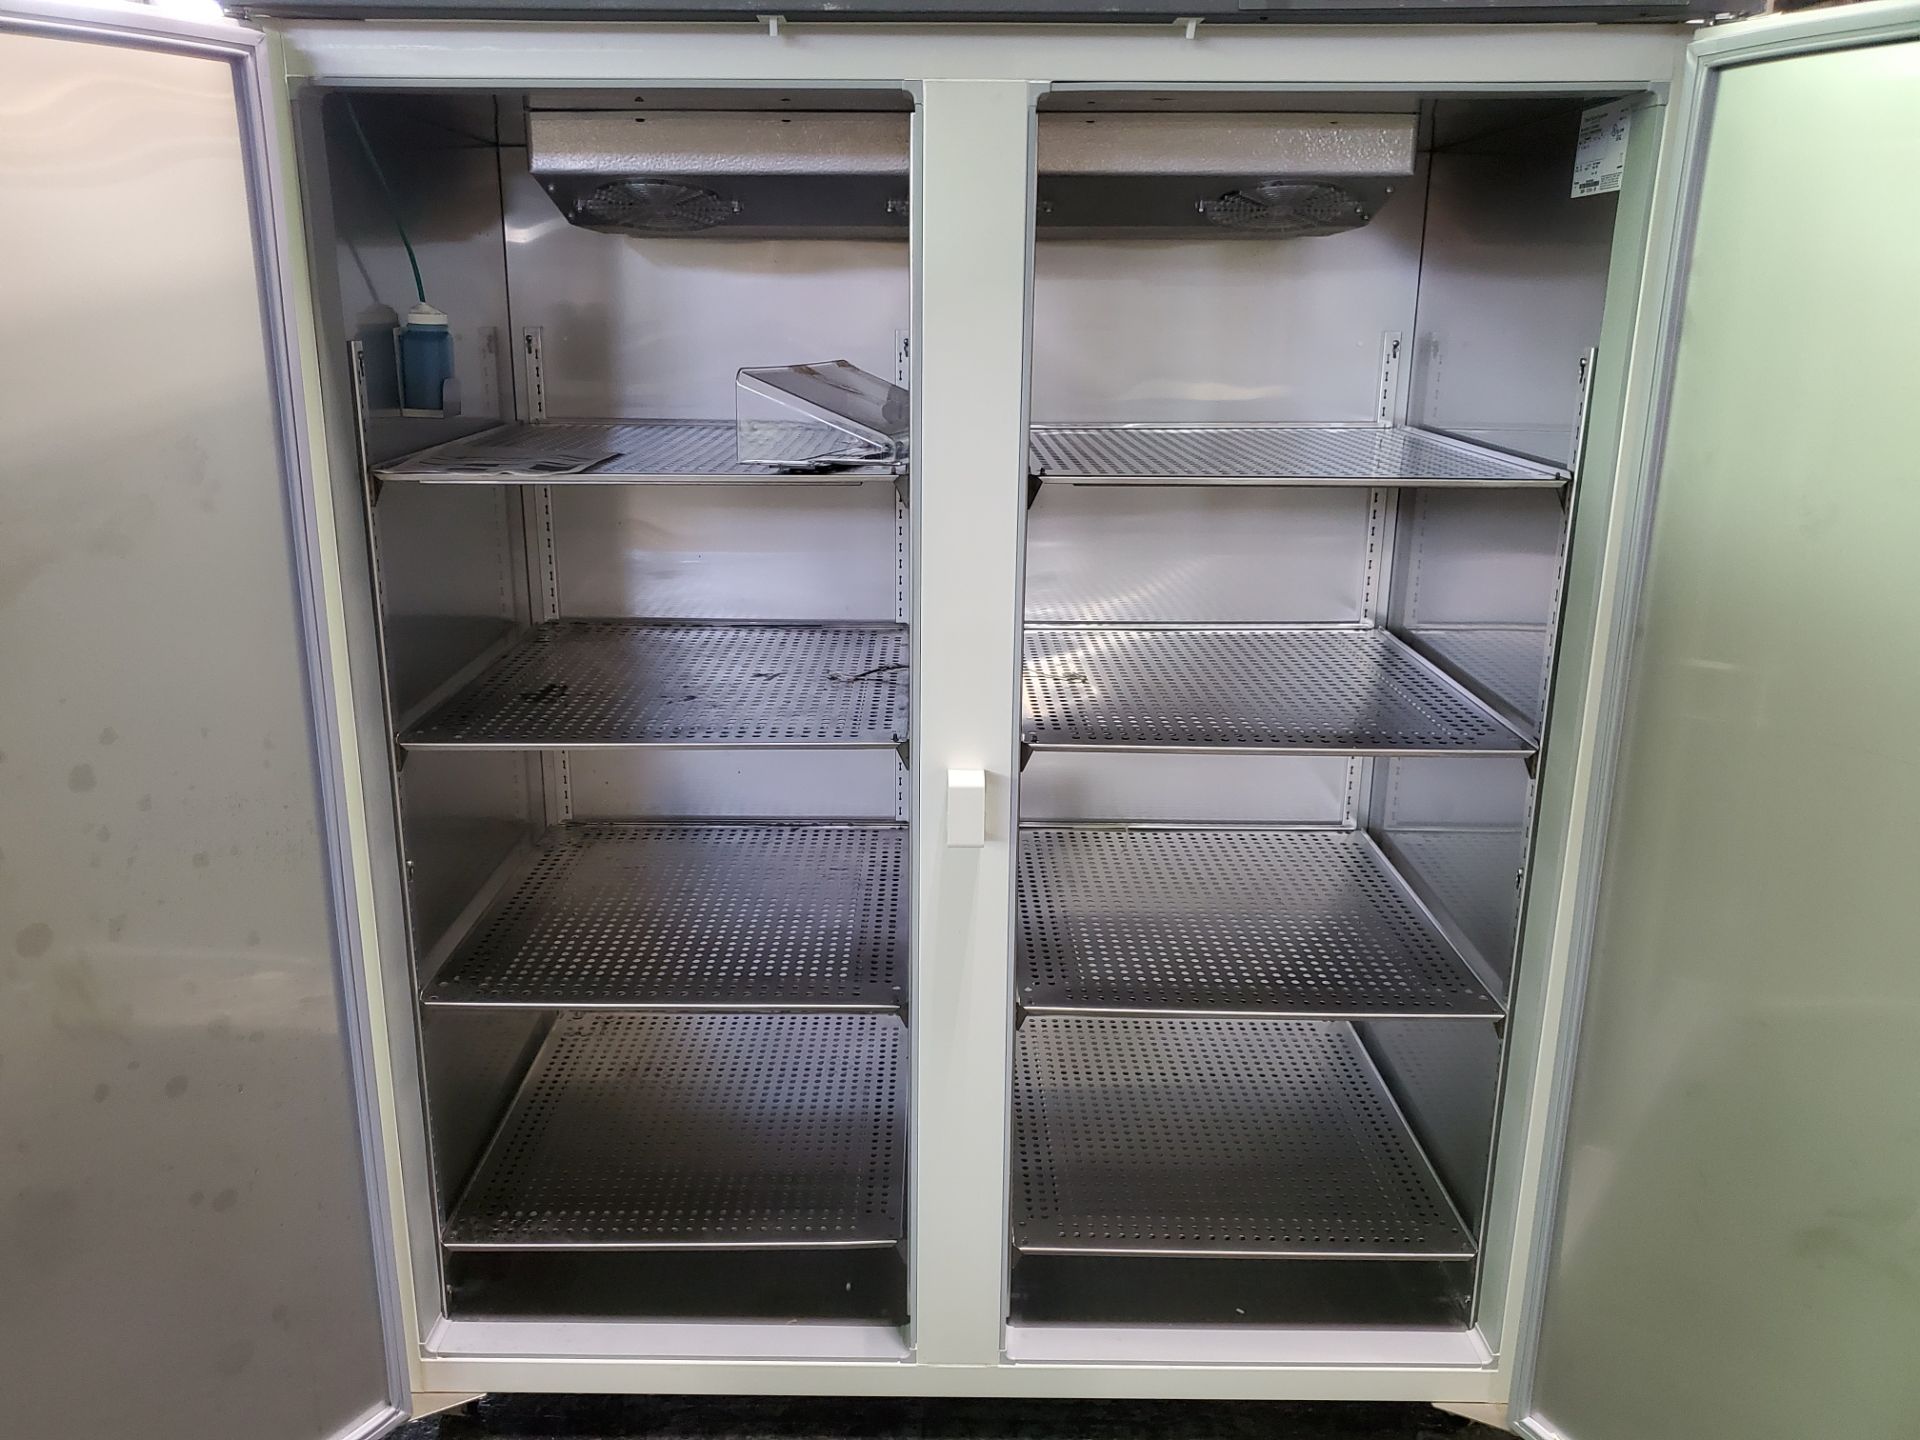 Revco/Thermo Electron Freezer, model REL5004A21, 53" wide x 25"deep x 53" high chamber, R134a - Image 5 of 7